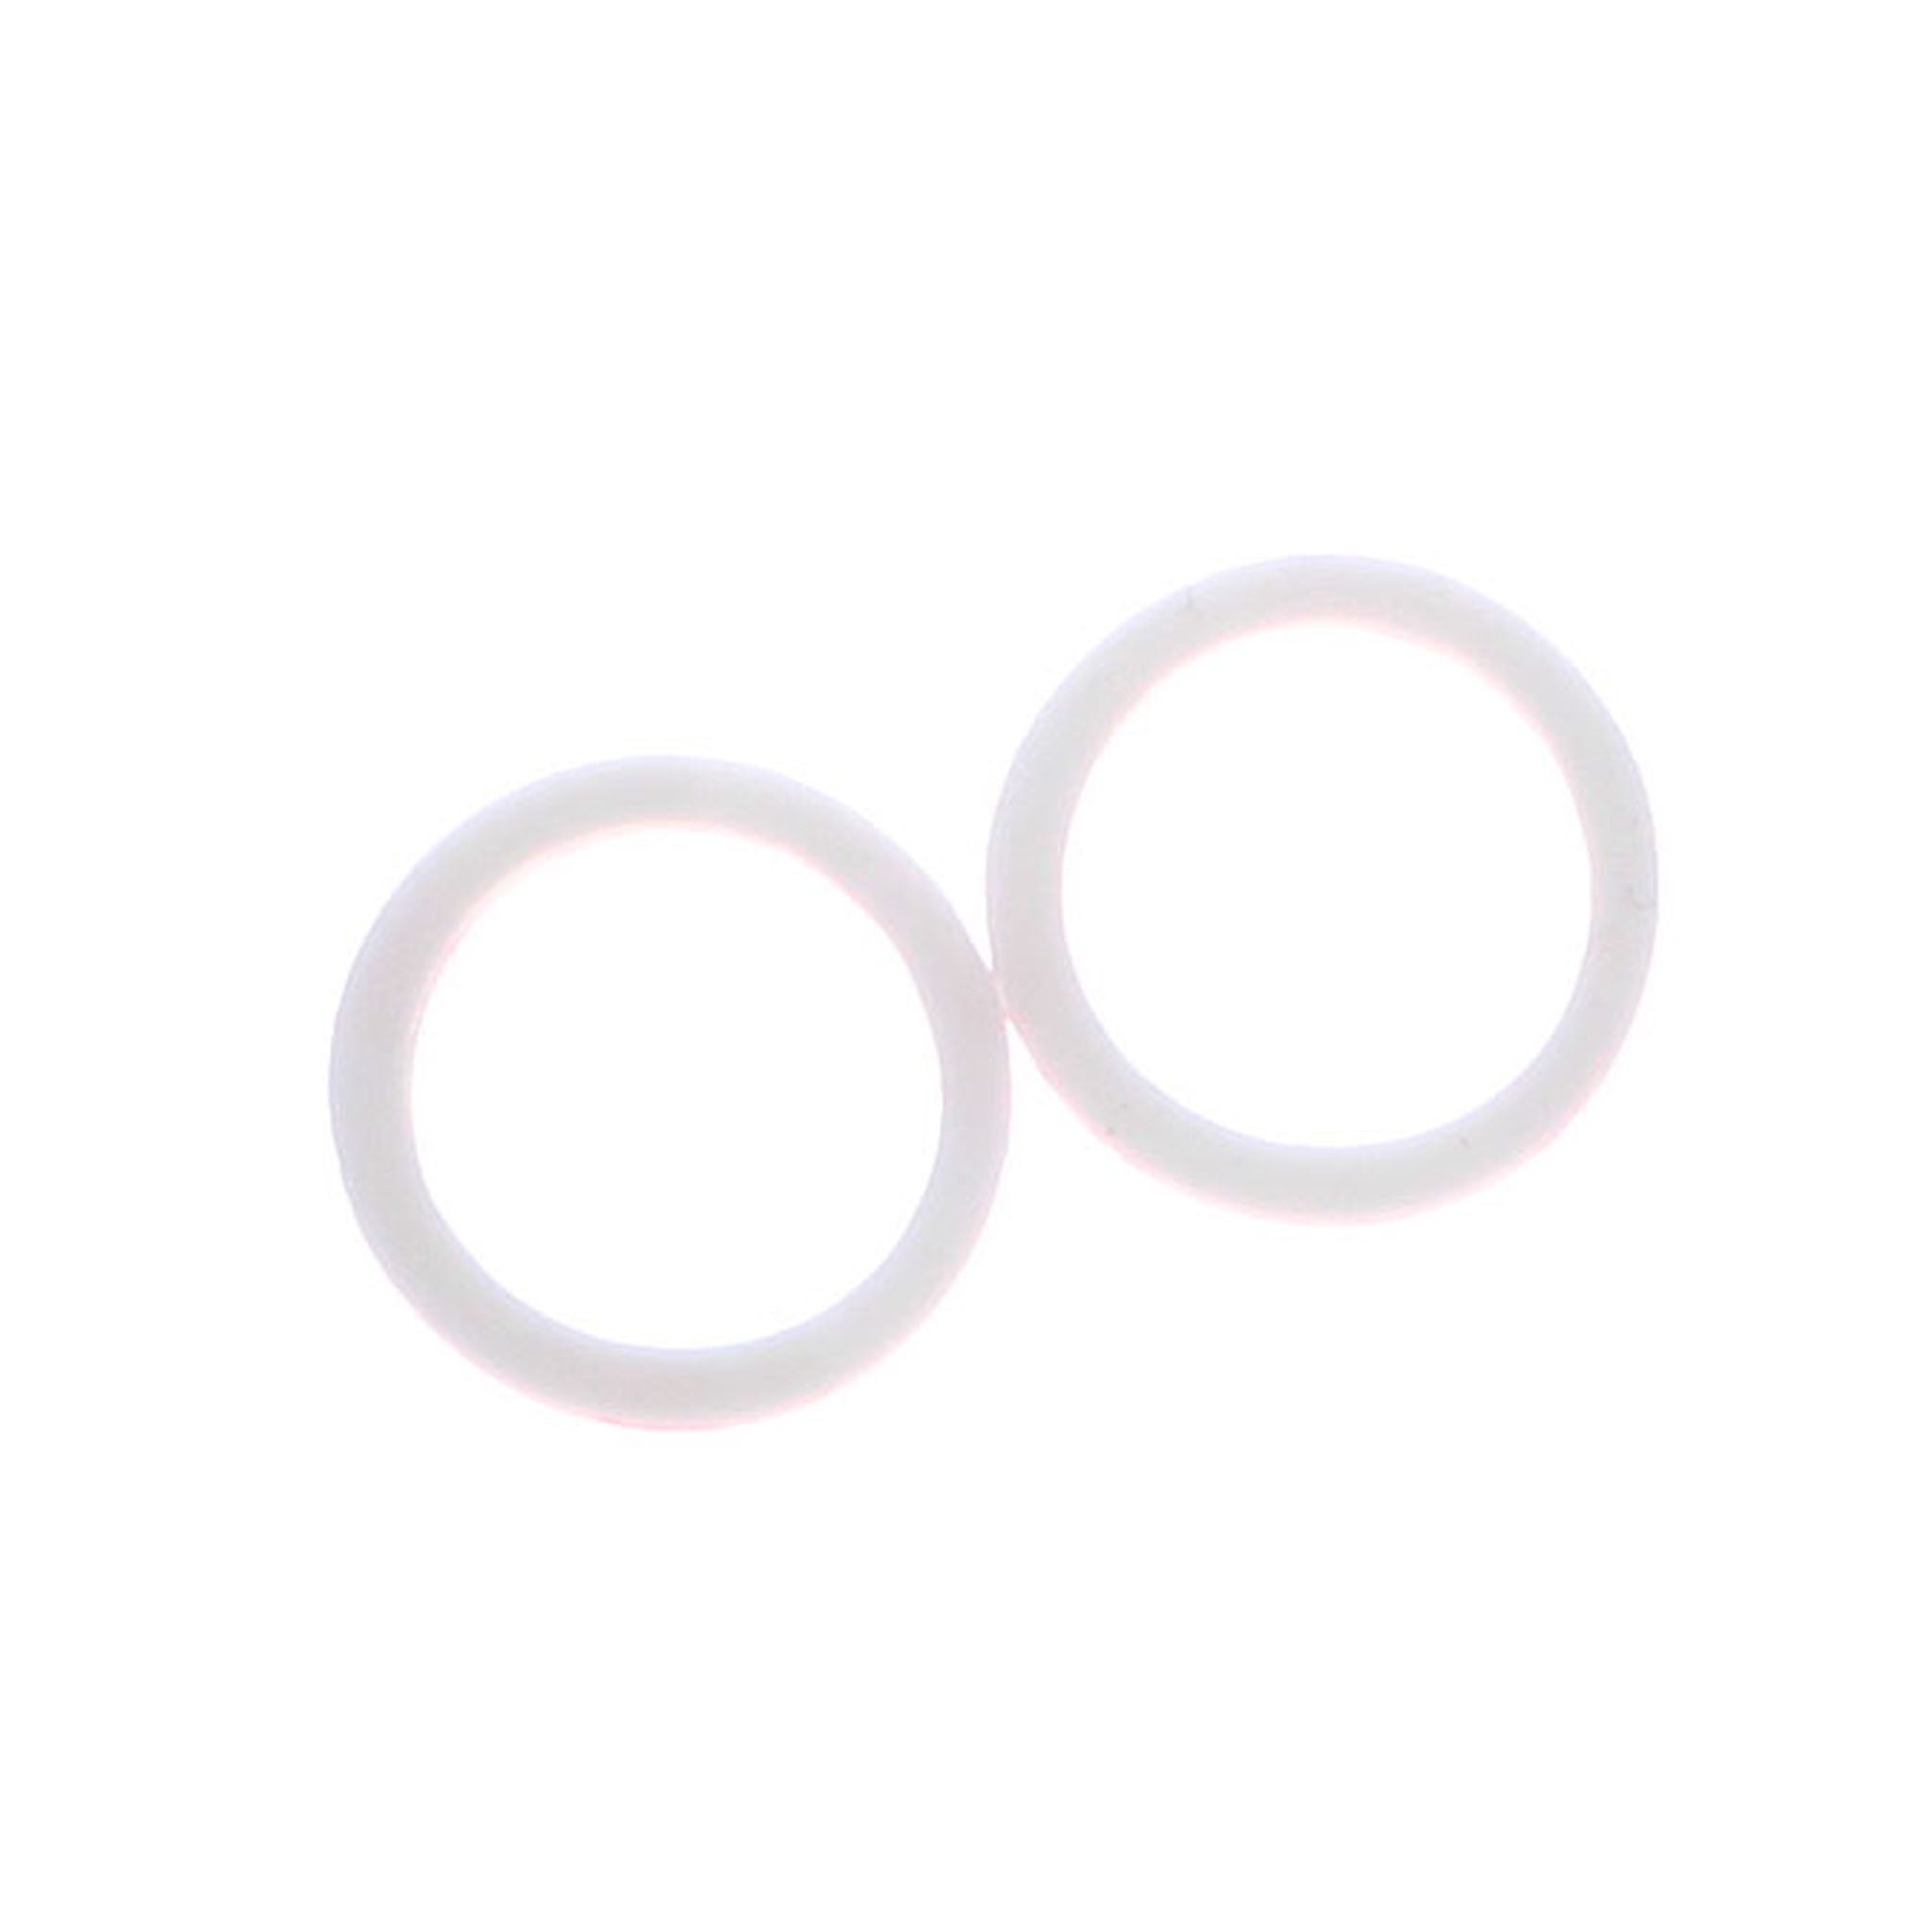 C3 Silicone Pad (Small / Size D) (2pcs) - C3yoyodesign